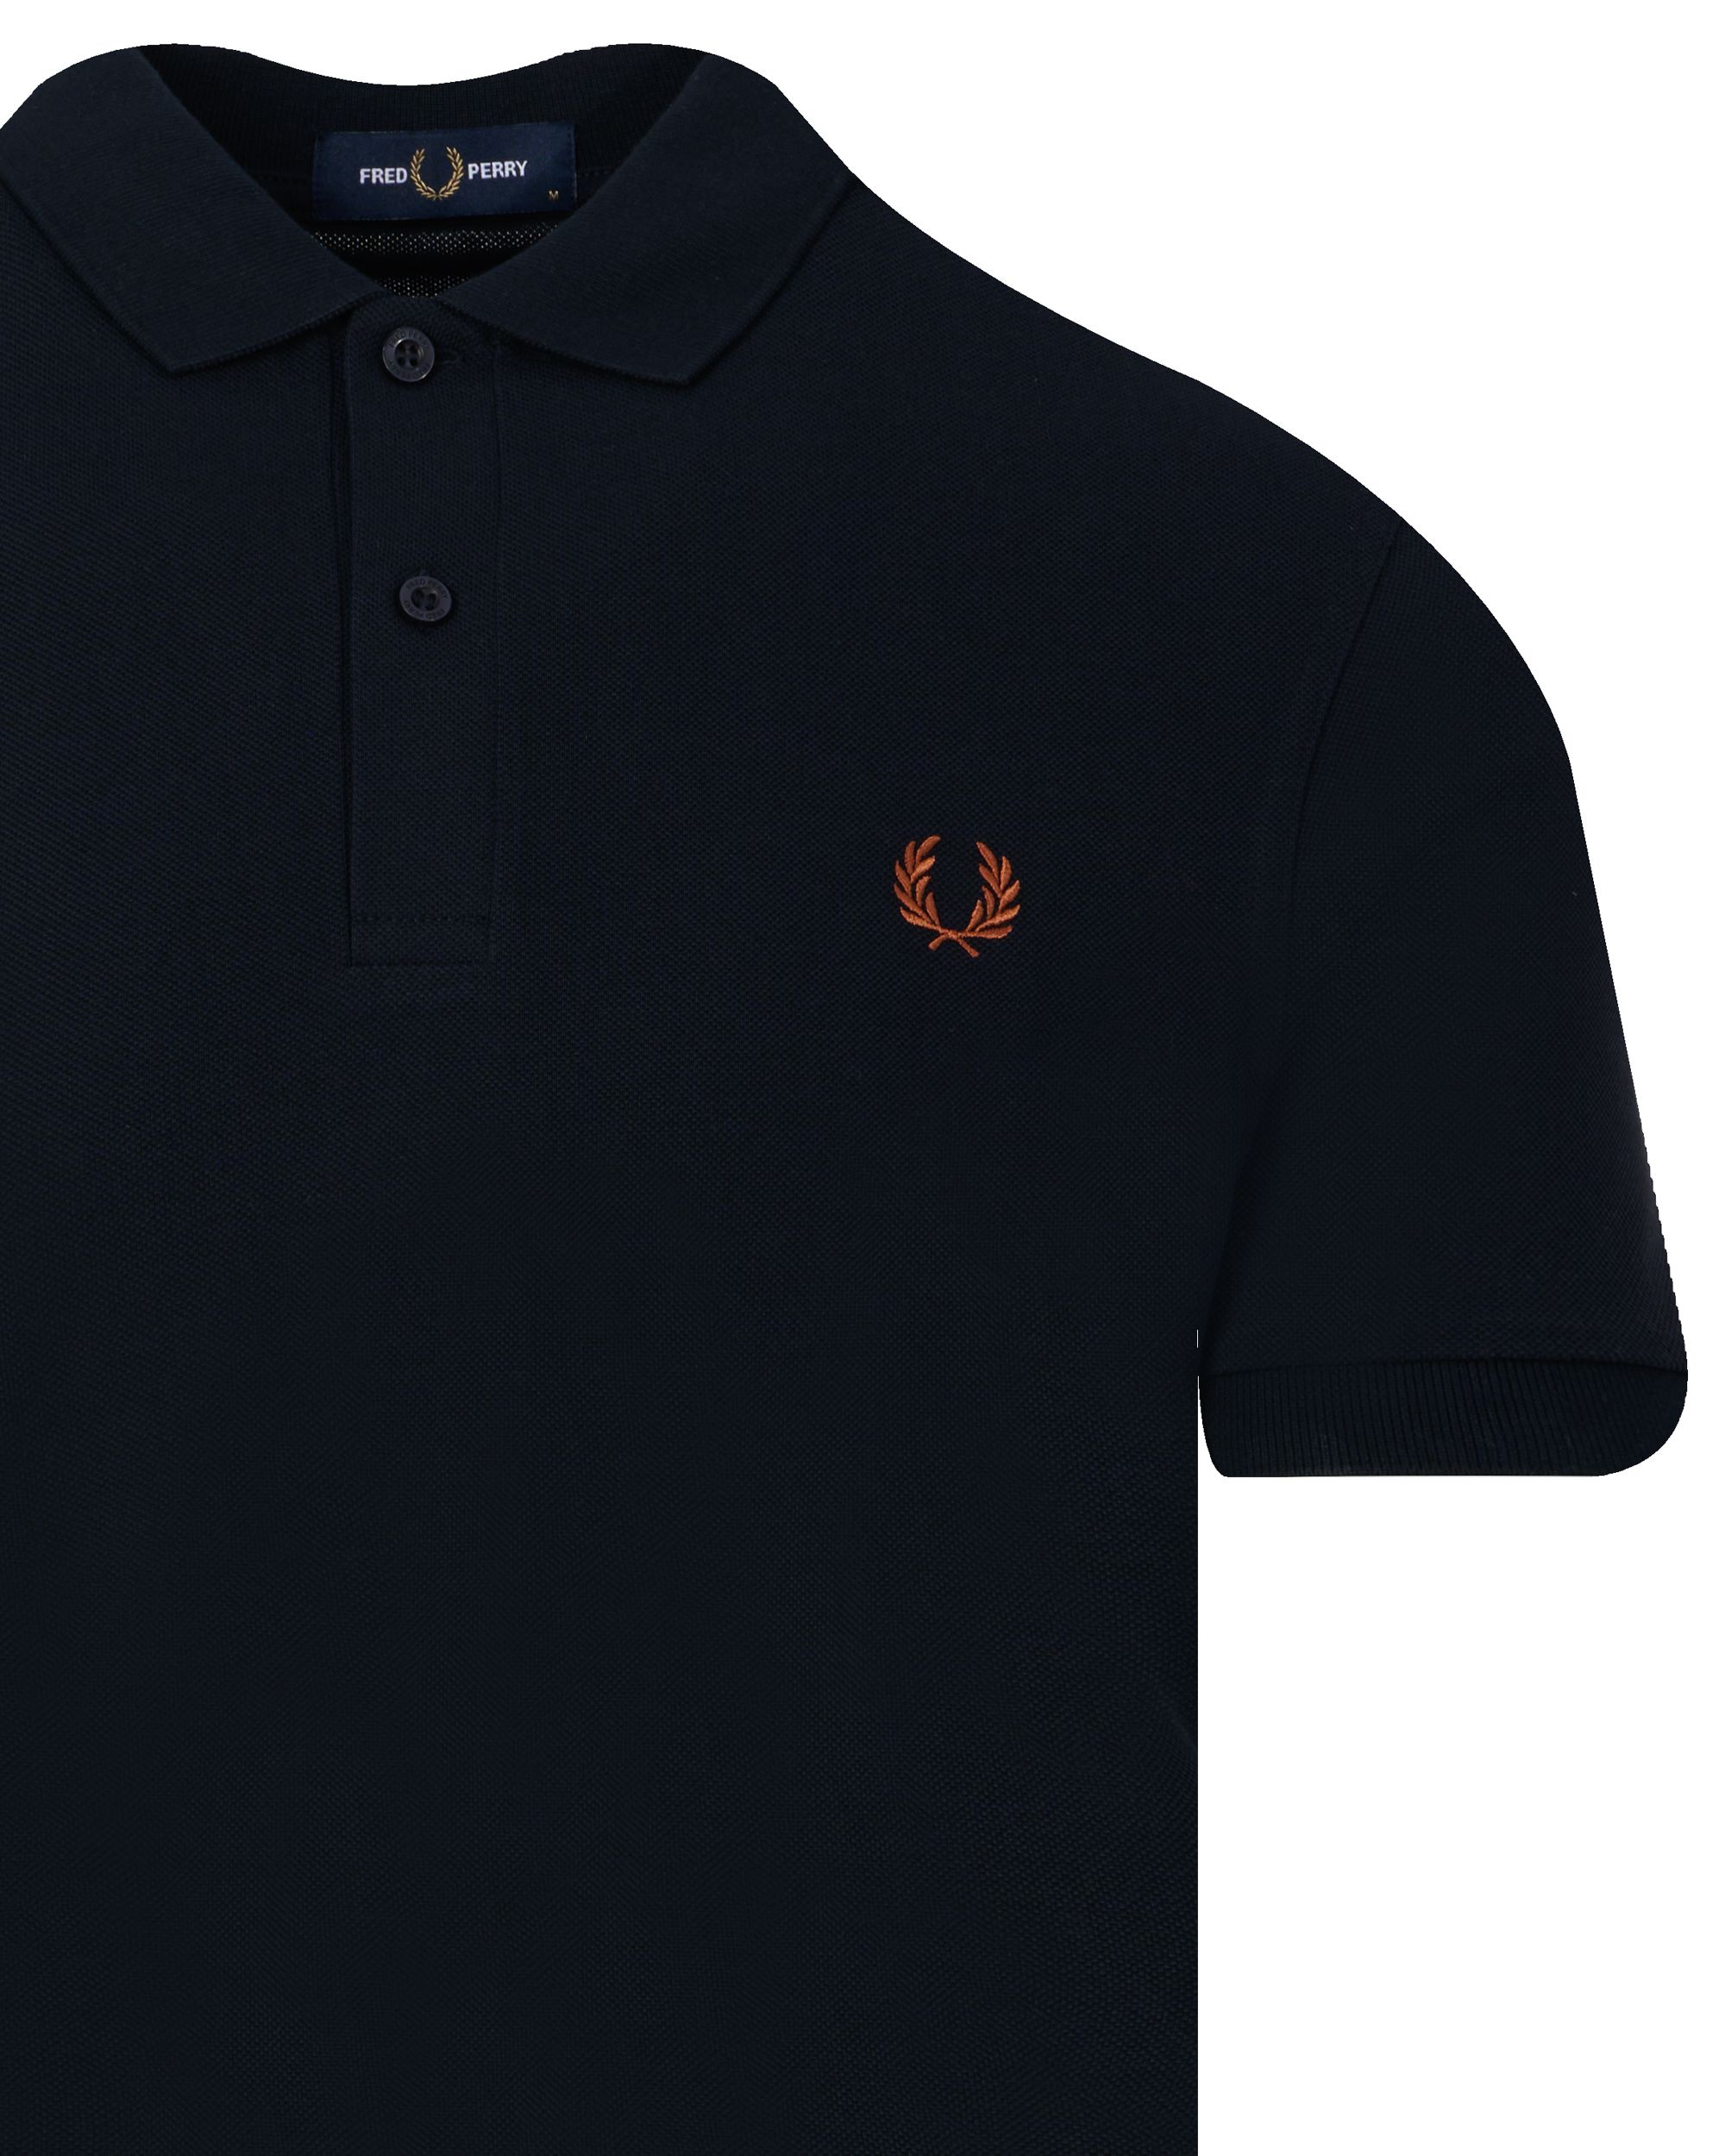 Fred Perry Polo KM Donker blauw 095674-001-L